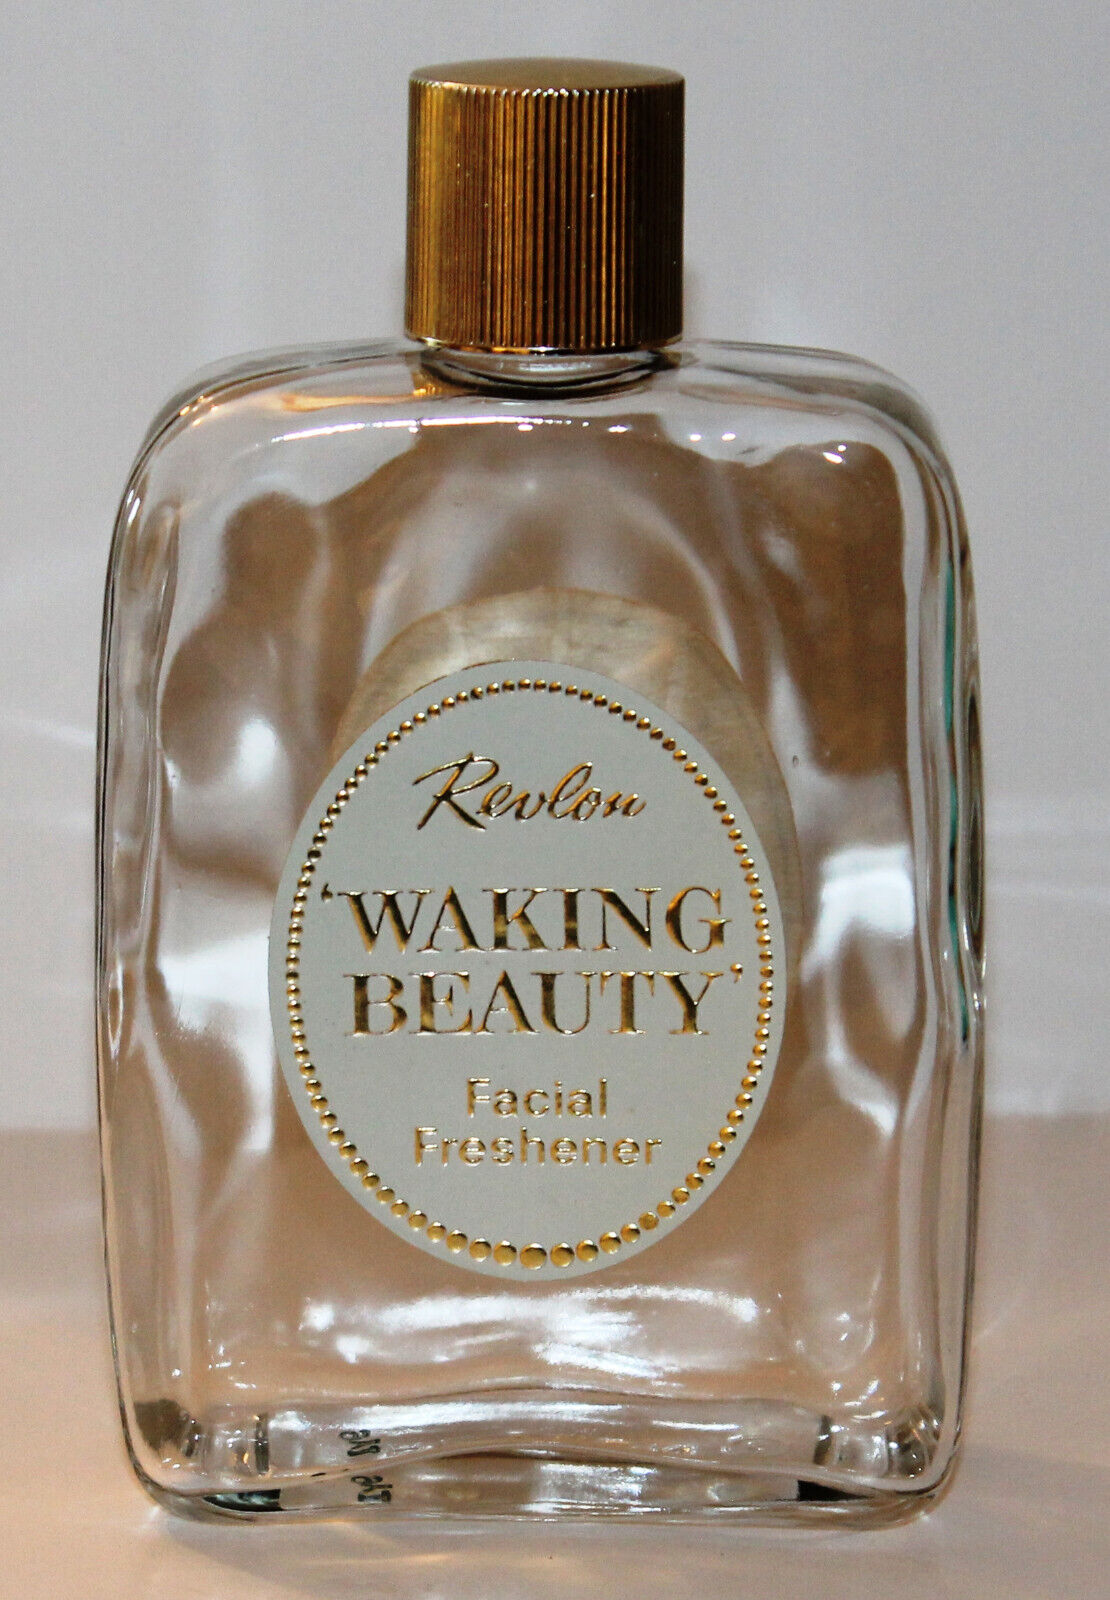 Vintage Revlon Waking Beauty Facial Refresher Empty Bottle Cosmetics Collectible